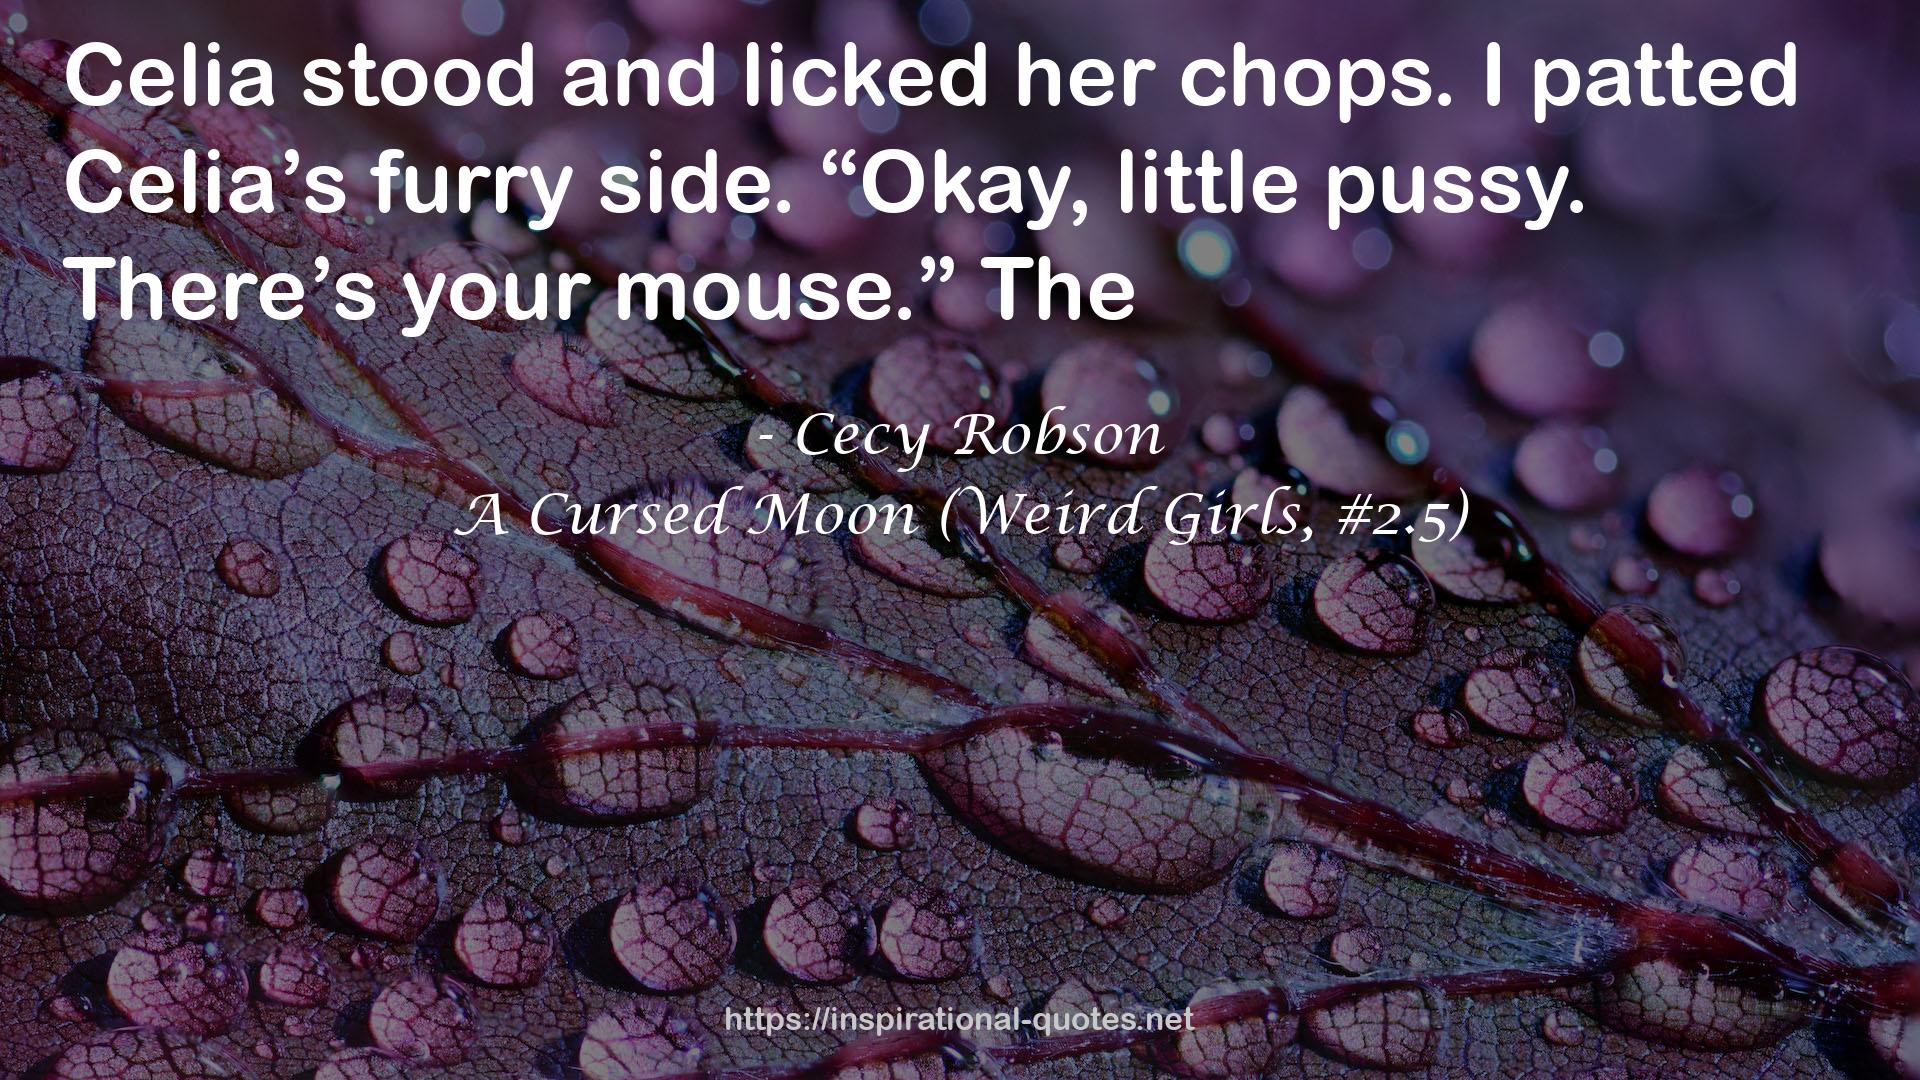 A Cursed Moon (Weird Girls, #2.5) QUOTES